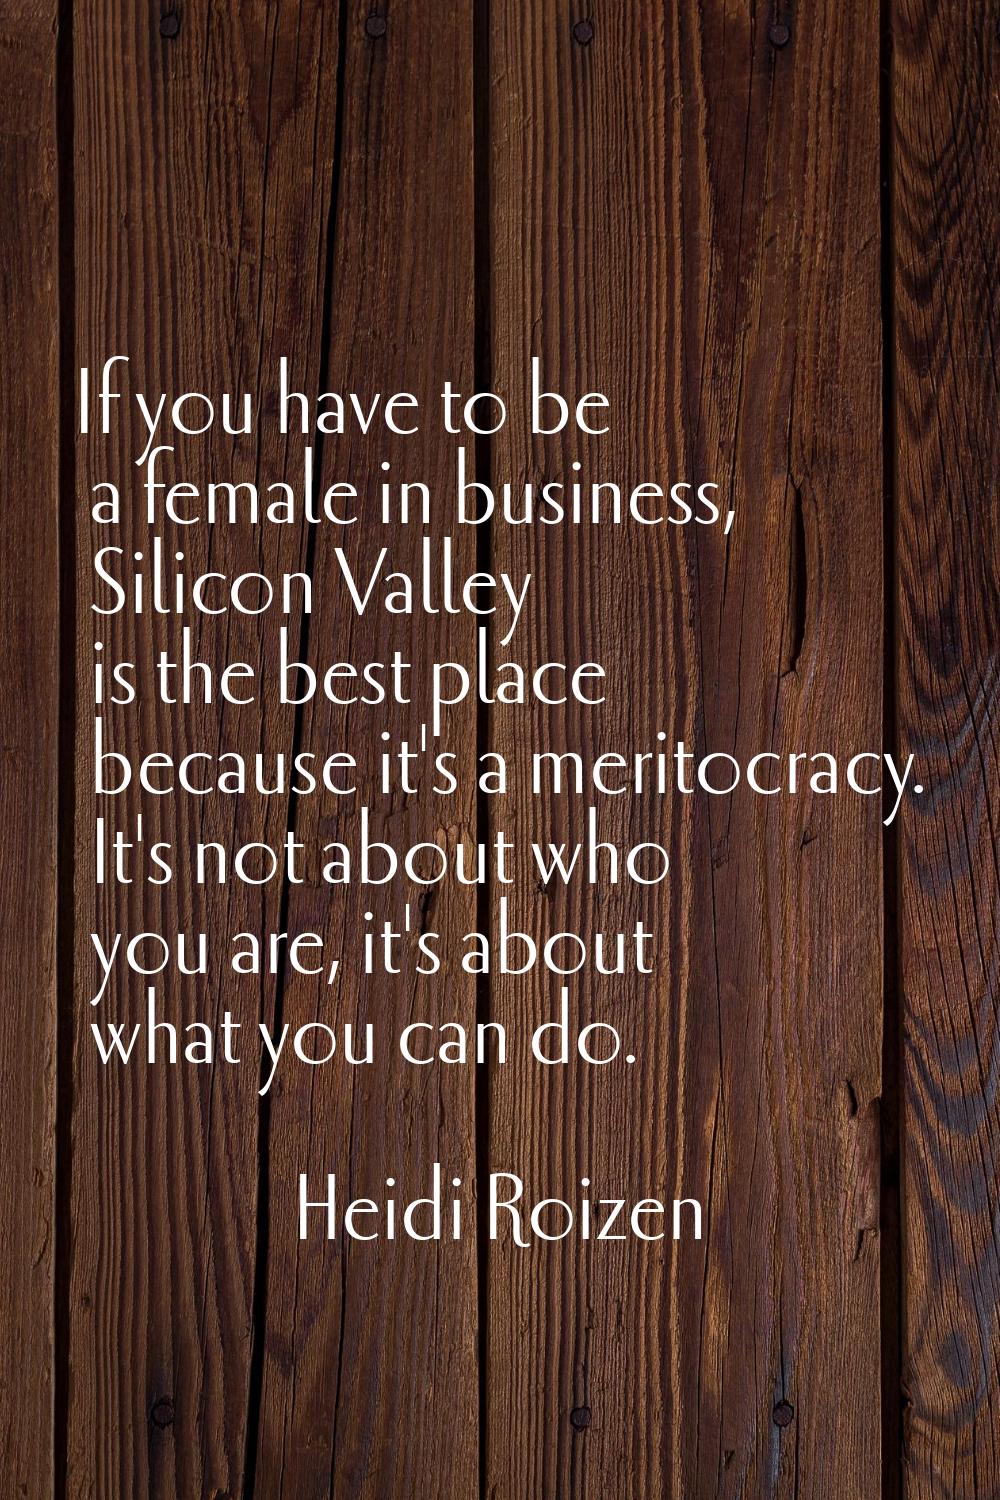 If you have to be a female in business, Silicon Valley is the best place because it's a meritocracy